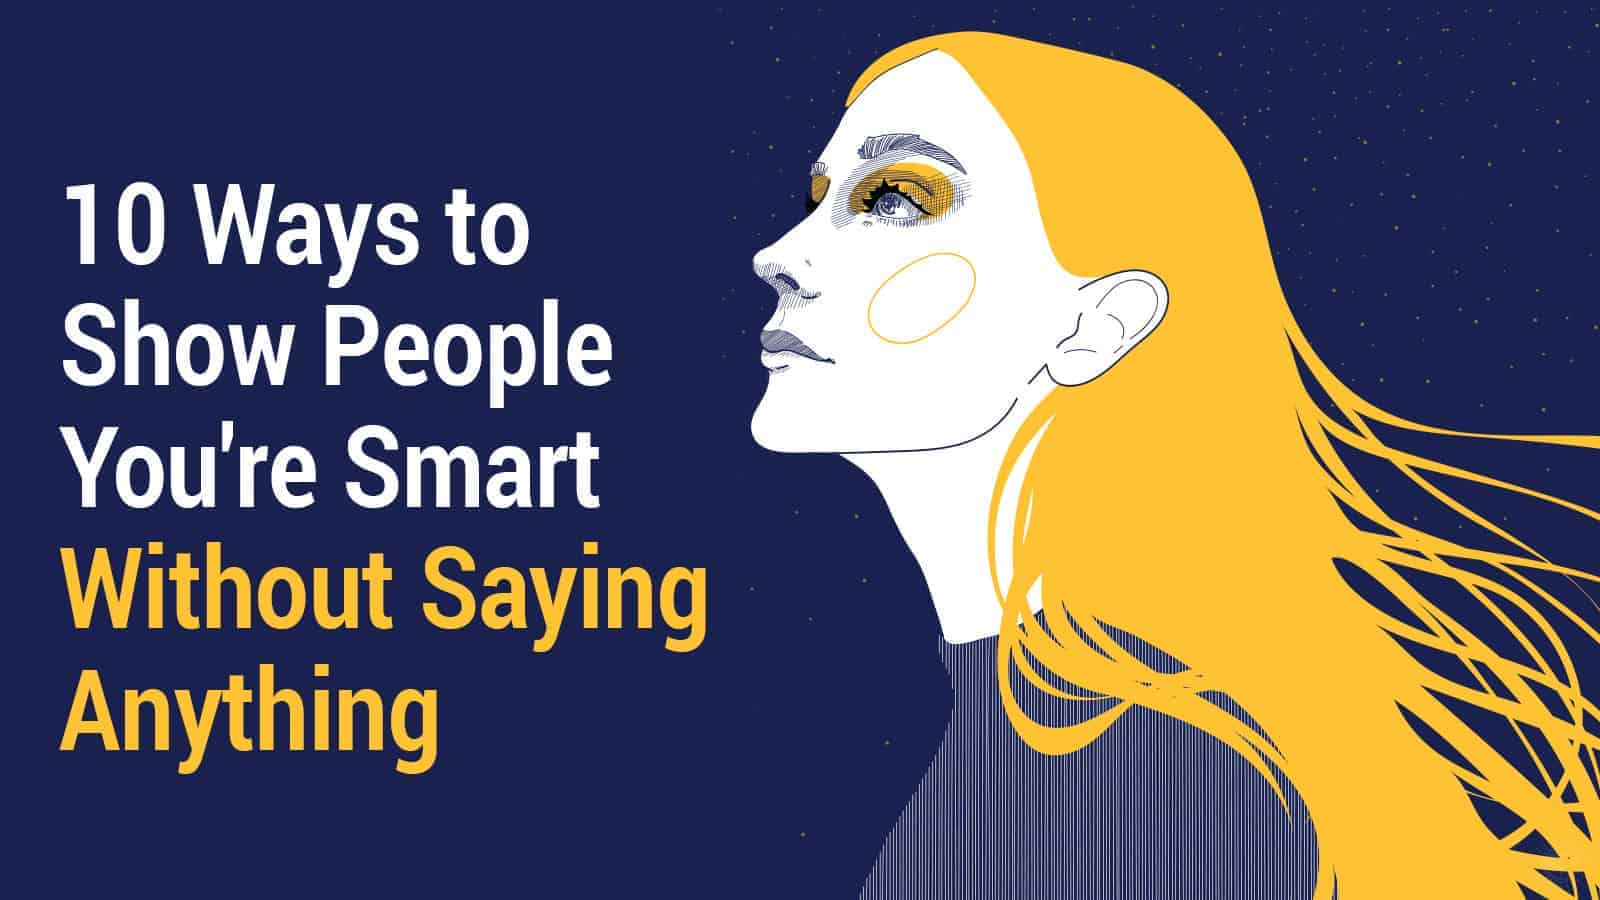 10 Ways to Show People You’re Smart Without Saying Anything